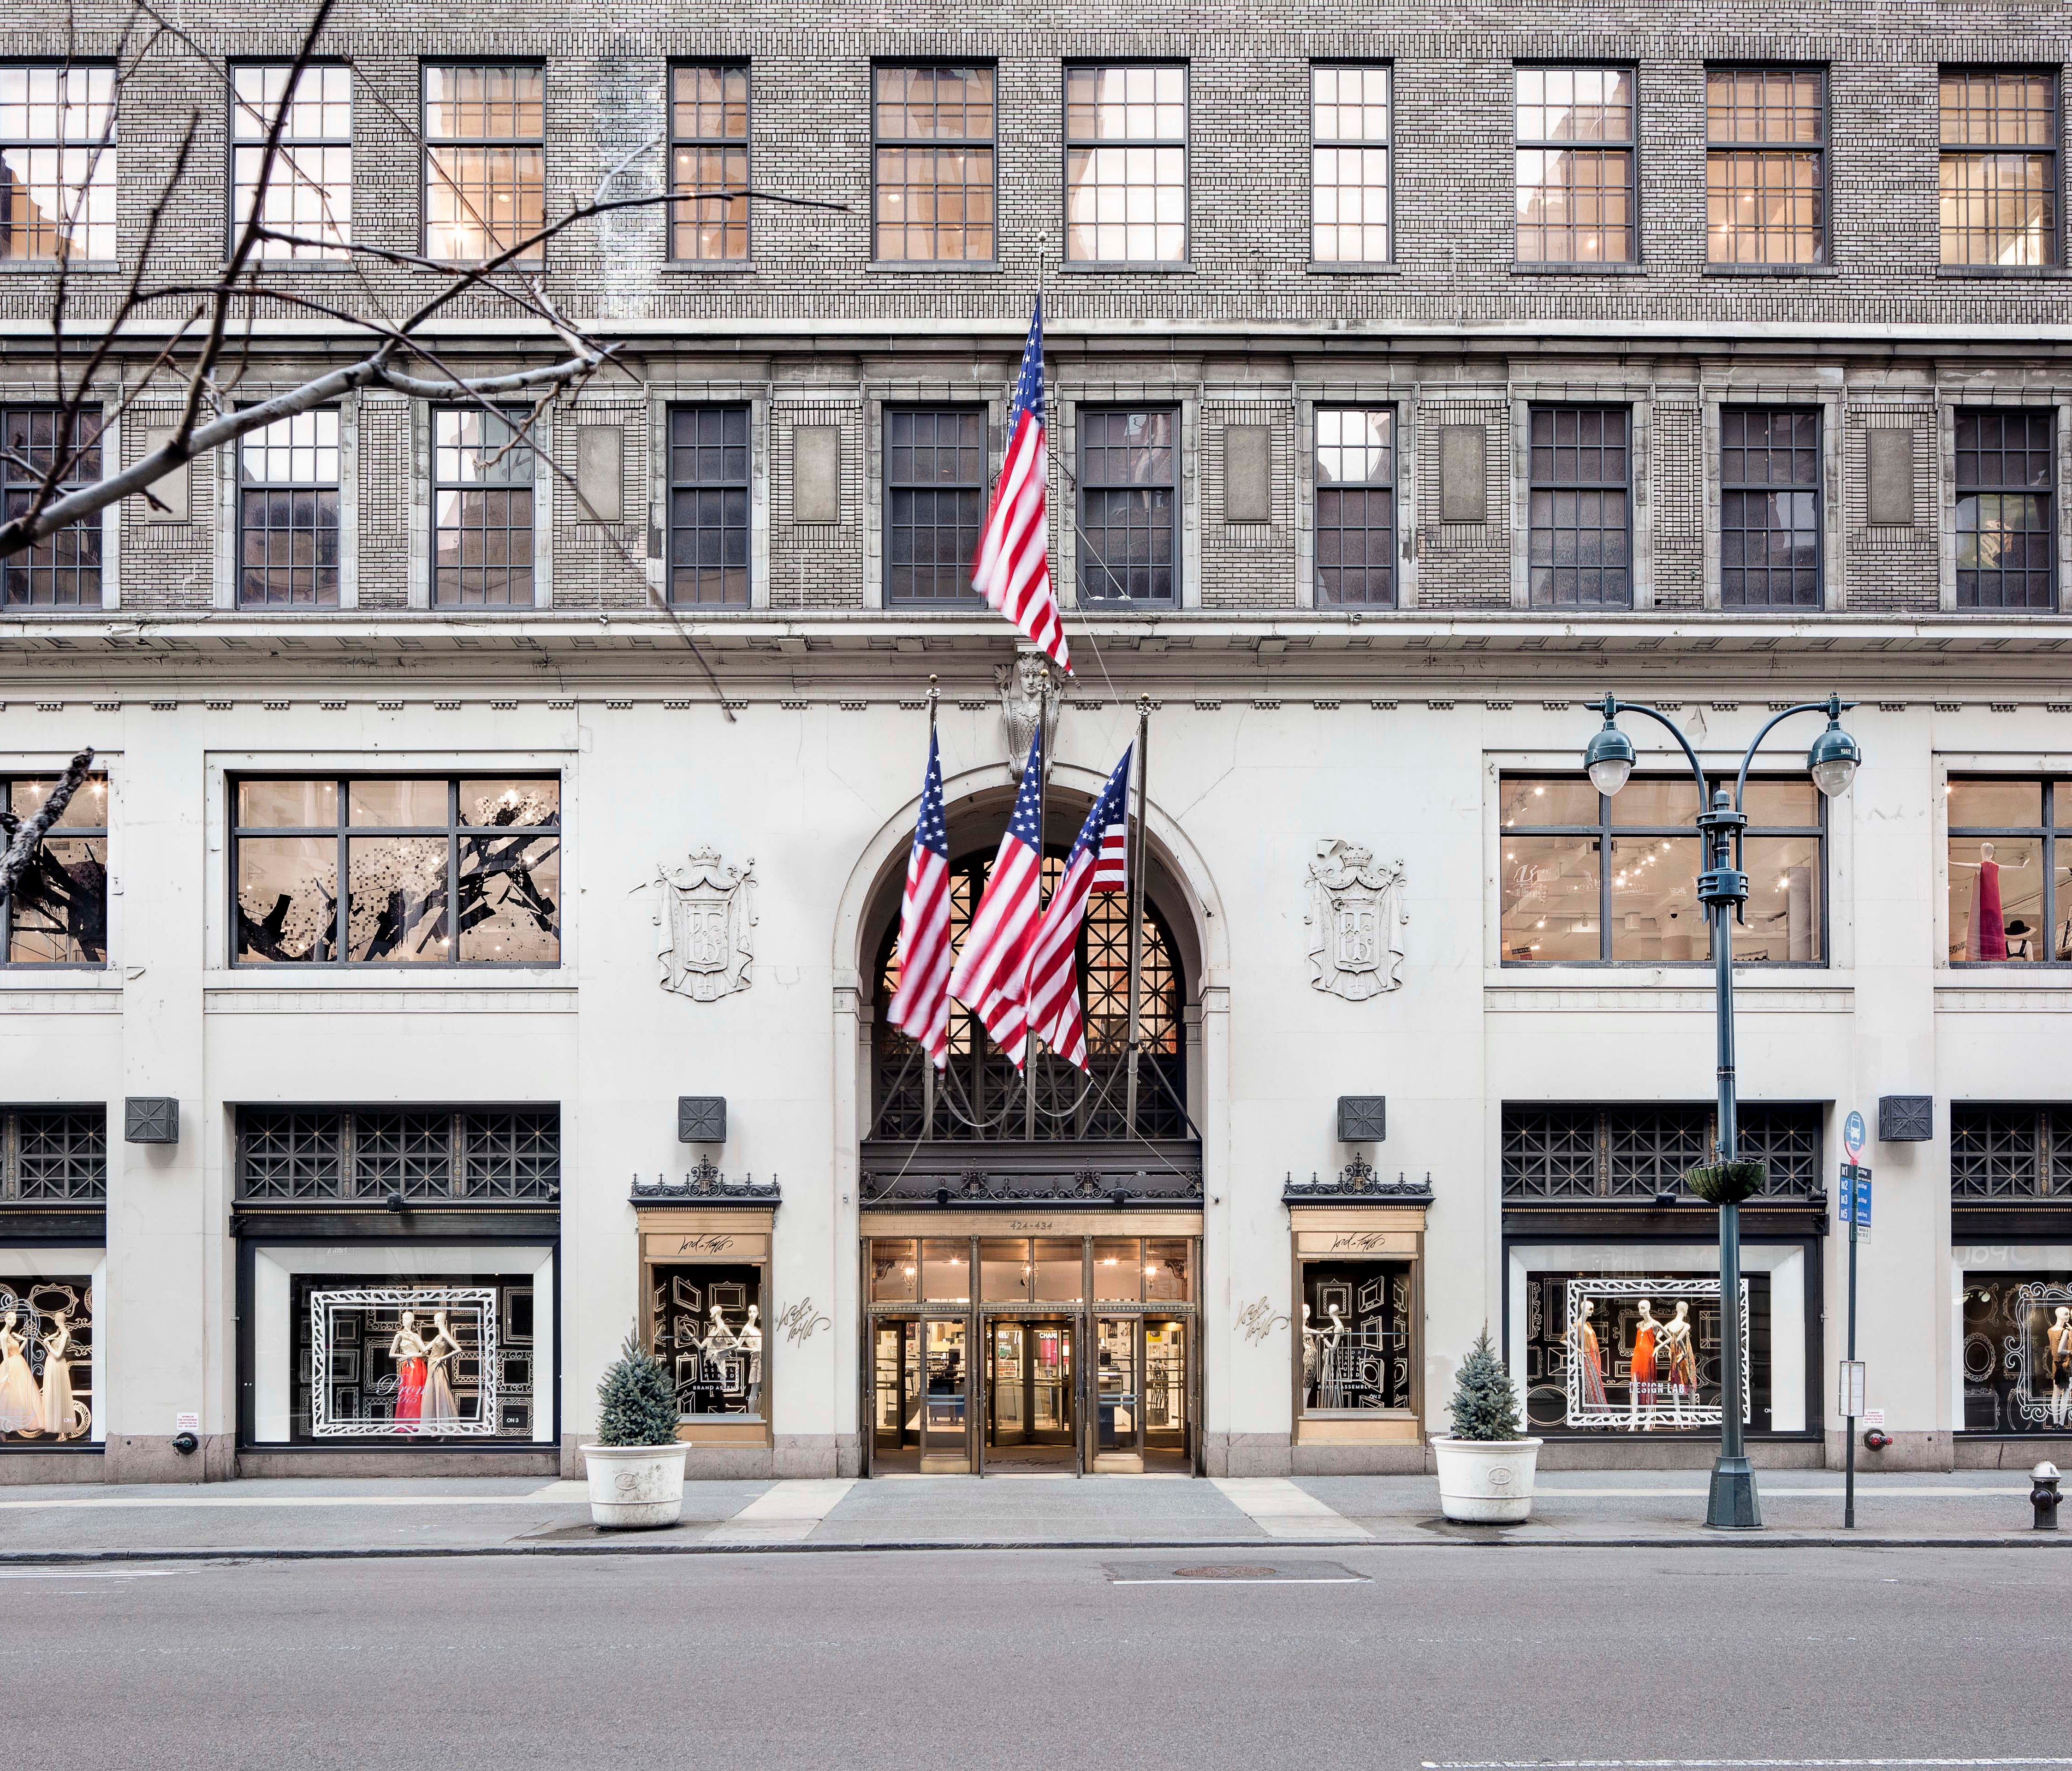 Startup WeWork is acquiring the Lord & Taylor Fifth Avenue store for $850 Million, as part of a larger deal in which the workplace provider will lease space in other Hudson's Bay Co. stores.